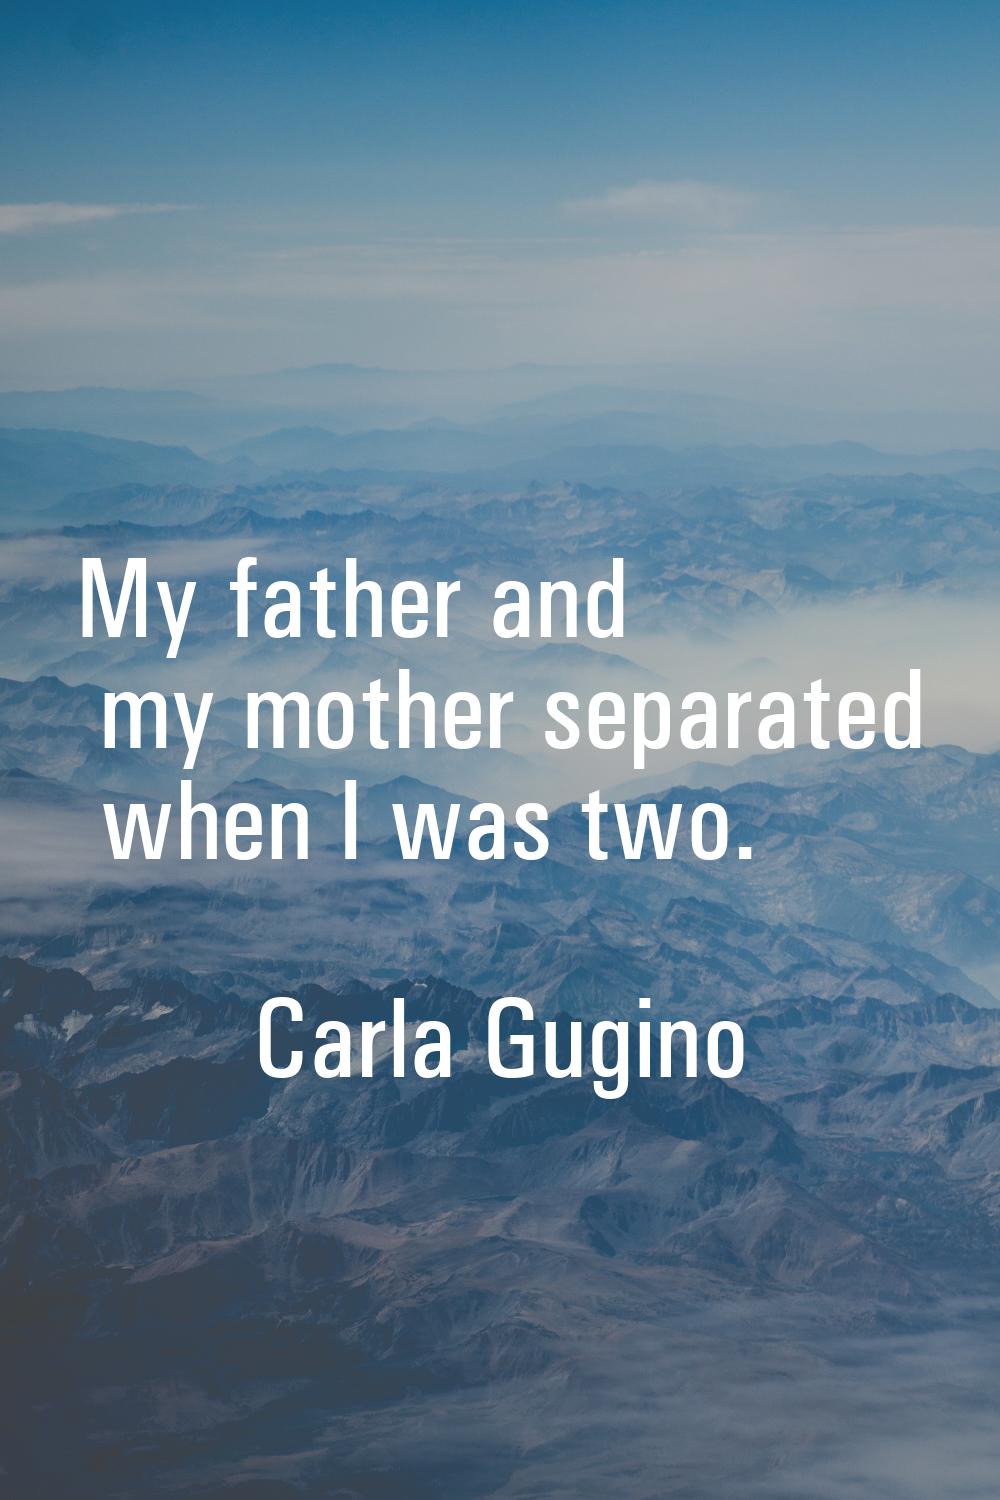 My father and my mother separated when I was two.